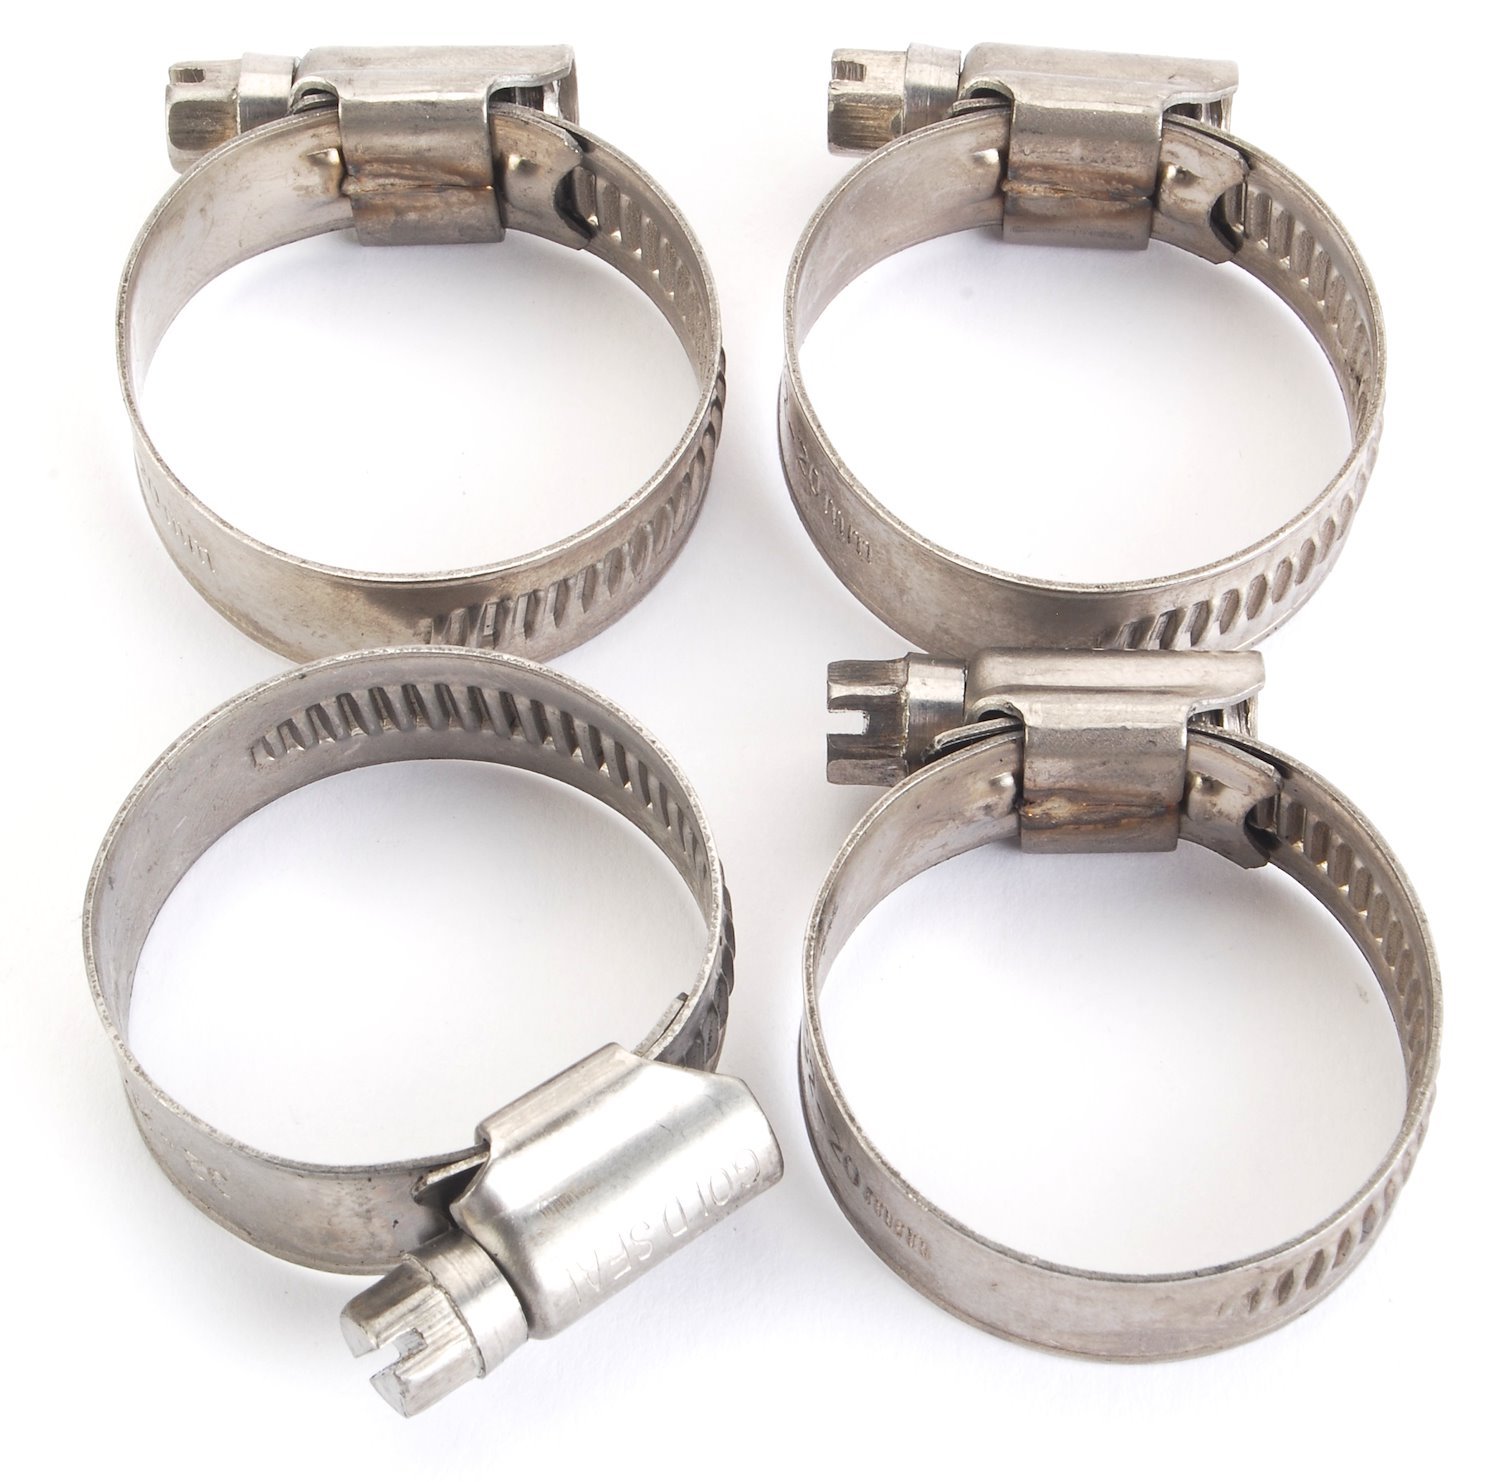 Stainless Steel Hose Clamps 7/8 in. to 1-1/4 in. OD